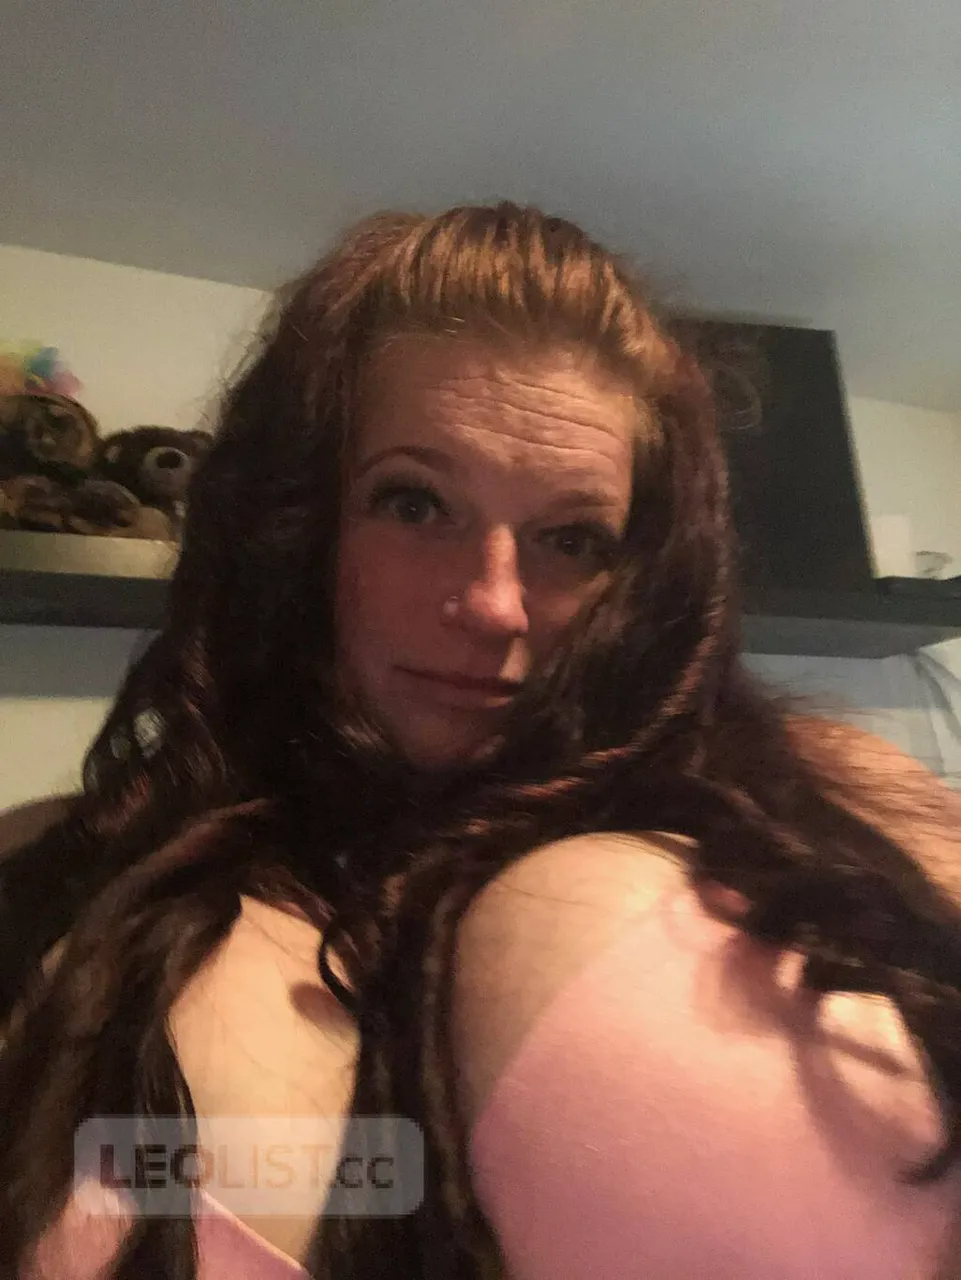 Escorts Calgary, Alberta Are you looking for a BBW, Stop looking I am here